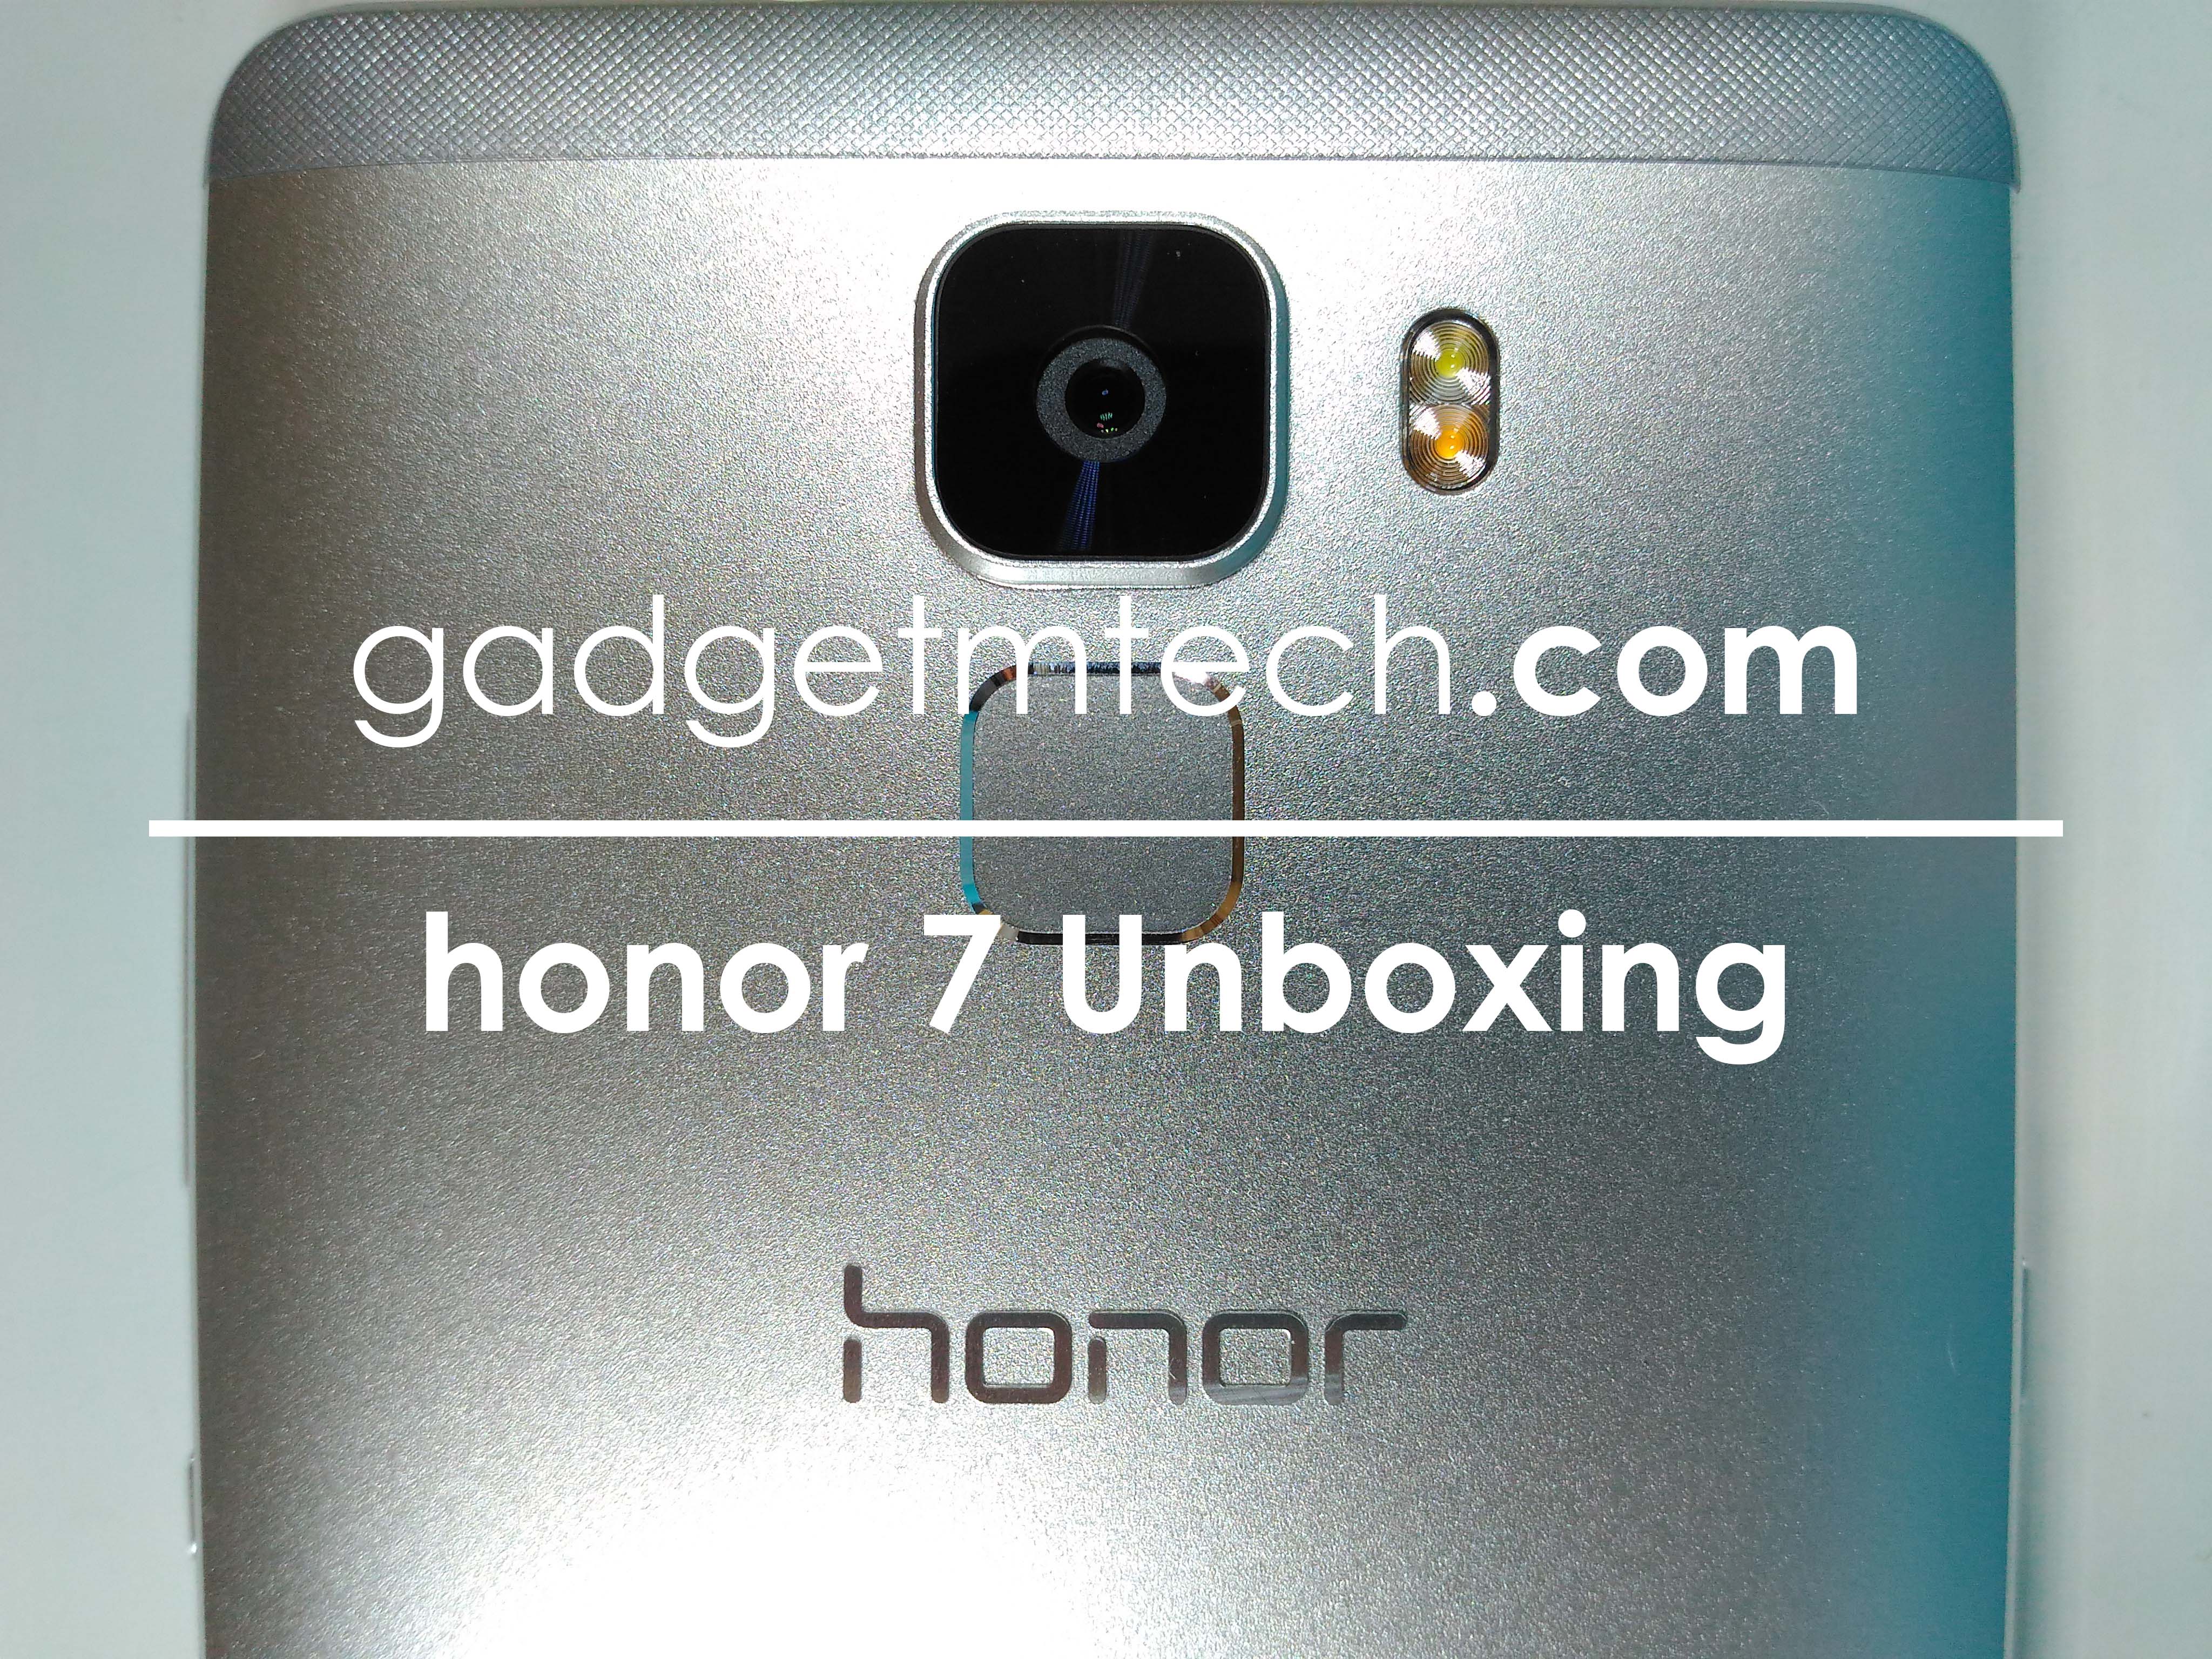 honor 7 Unboxing_1